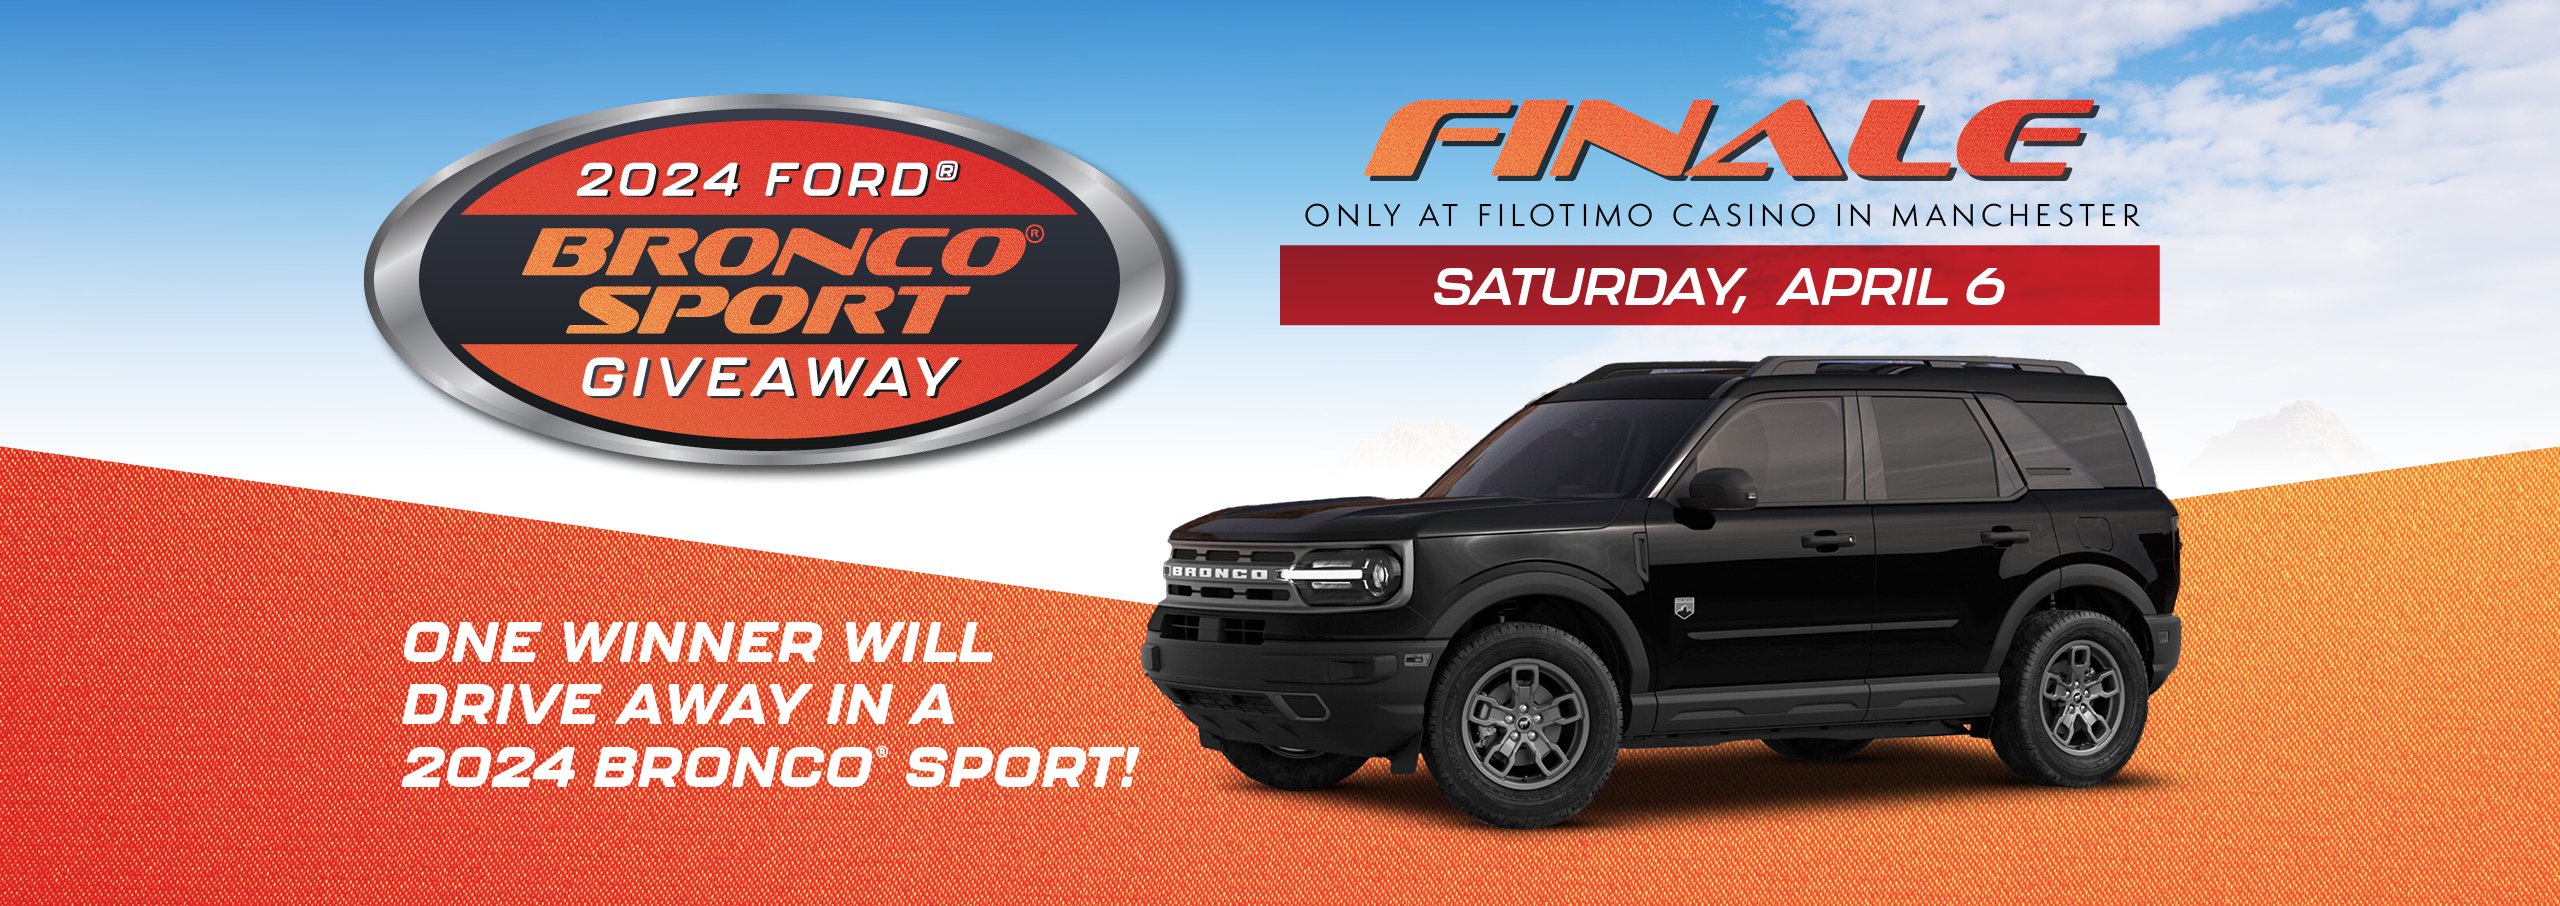 2024 Ford Bronco Sport Giveaway